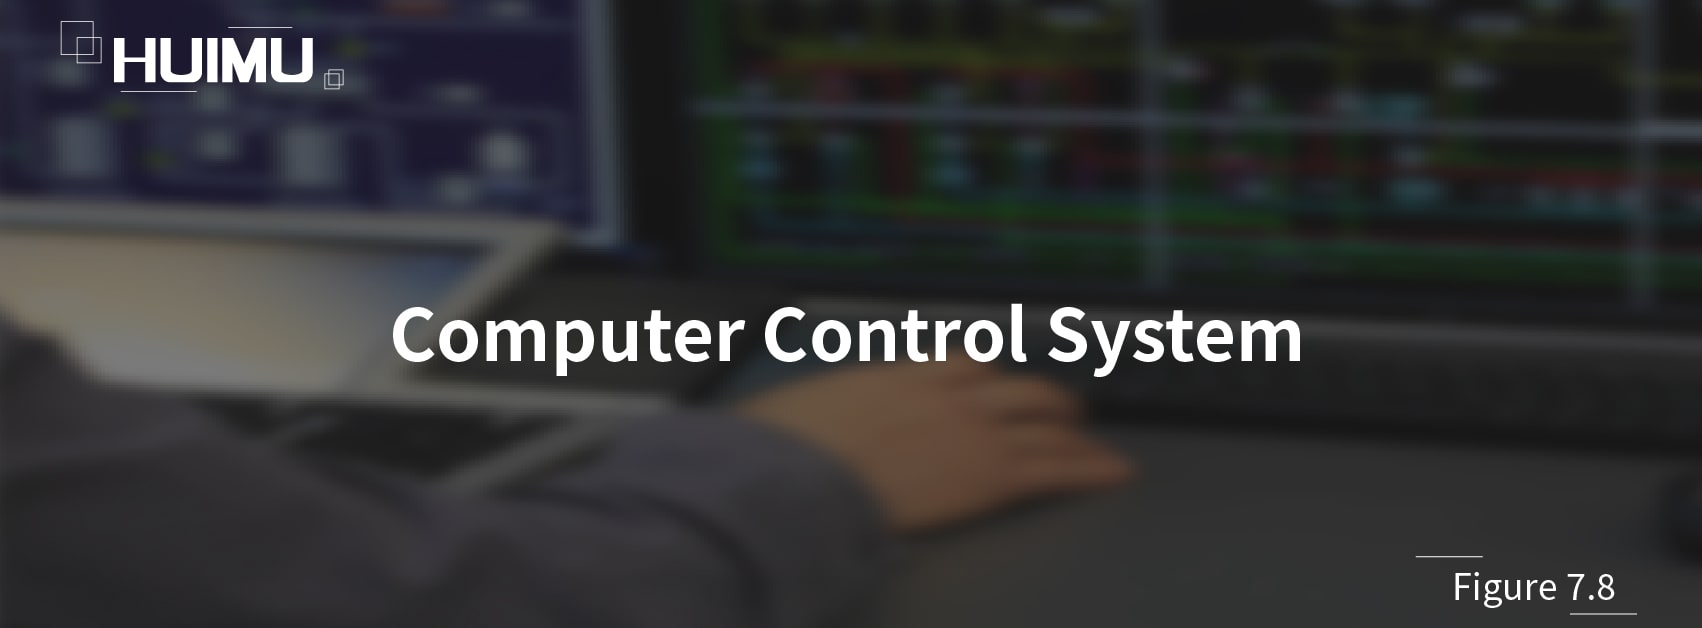 Computer Control System